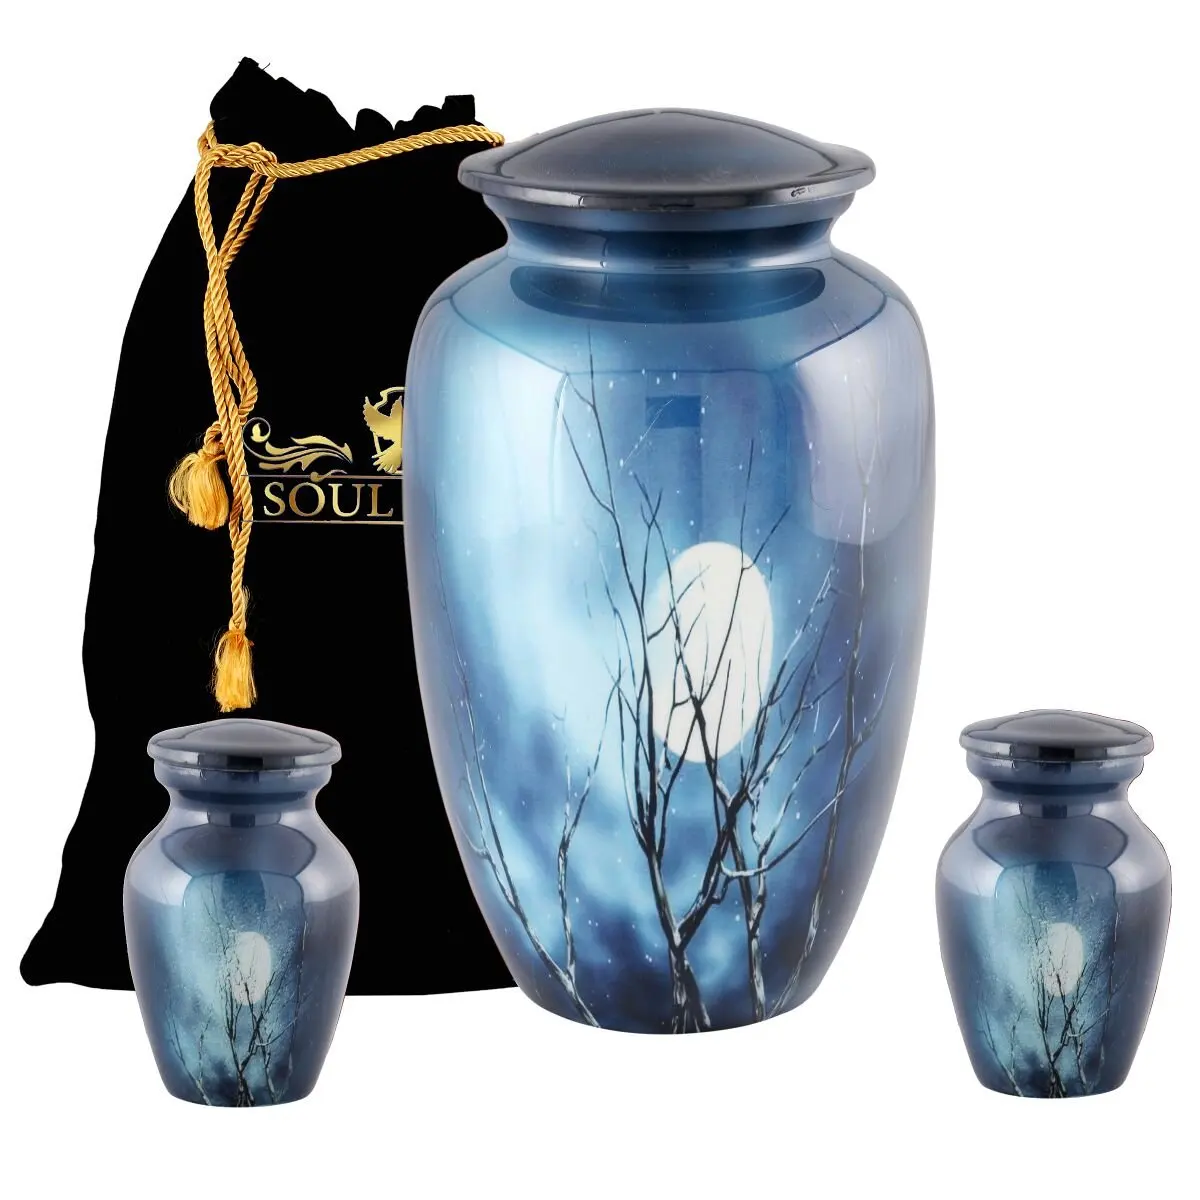 Buy Funeral Urn by SoulUrns - Cremation Urn for Human Ashes - Midnight